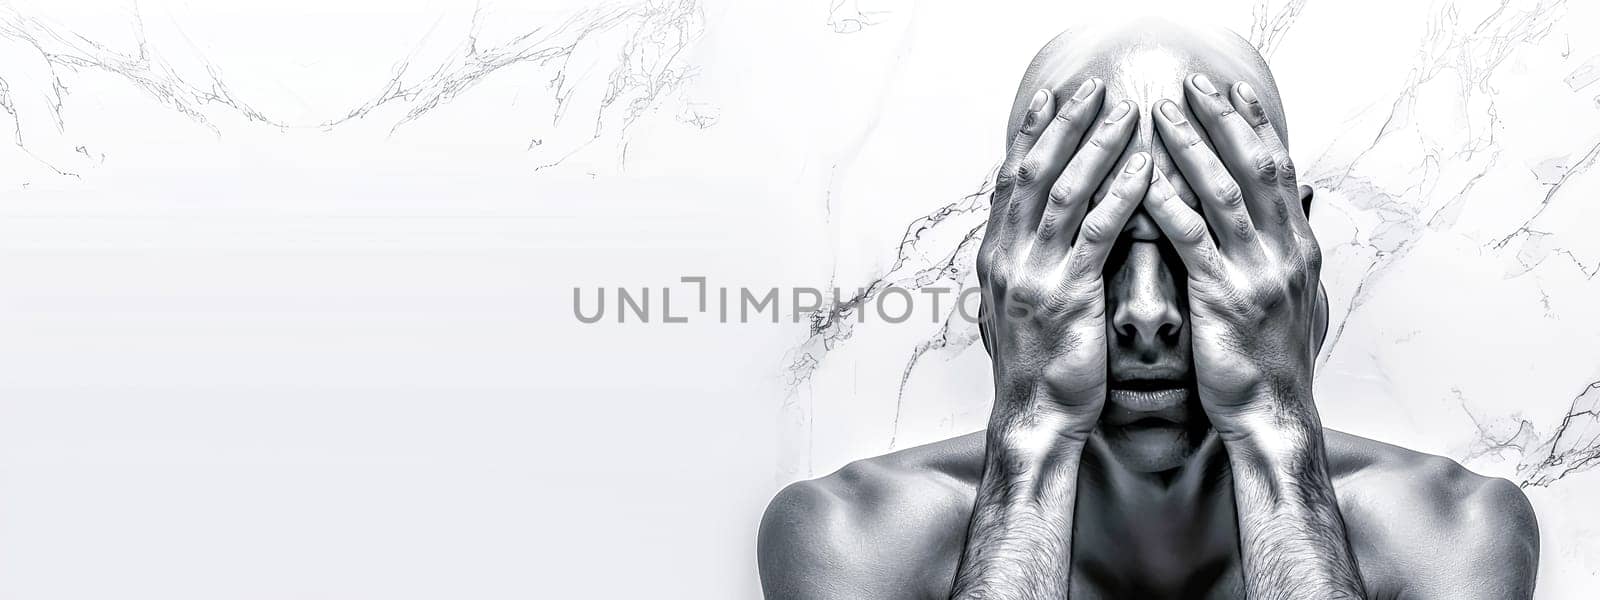 Artistic monochrome image of a person covering face with hands